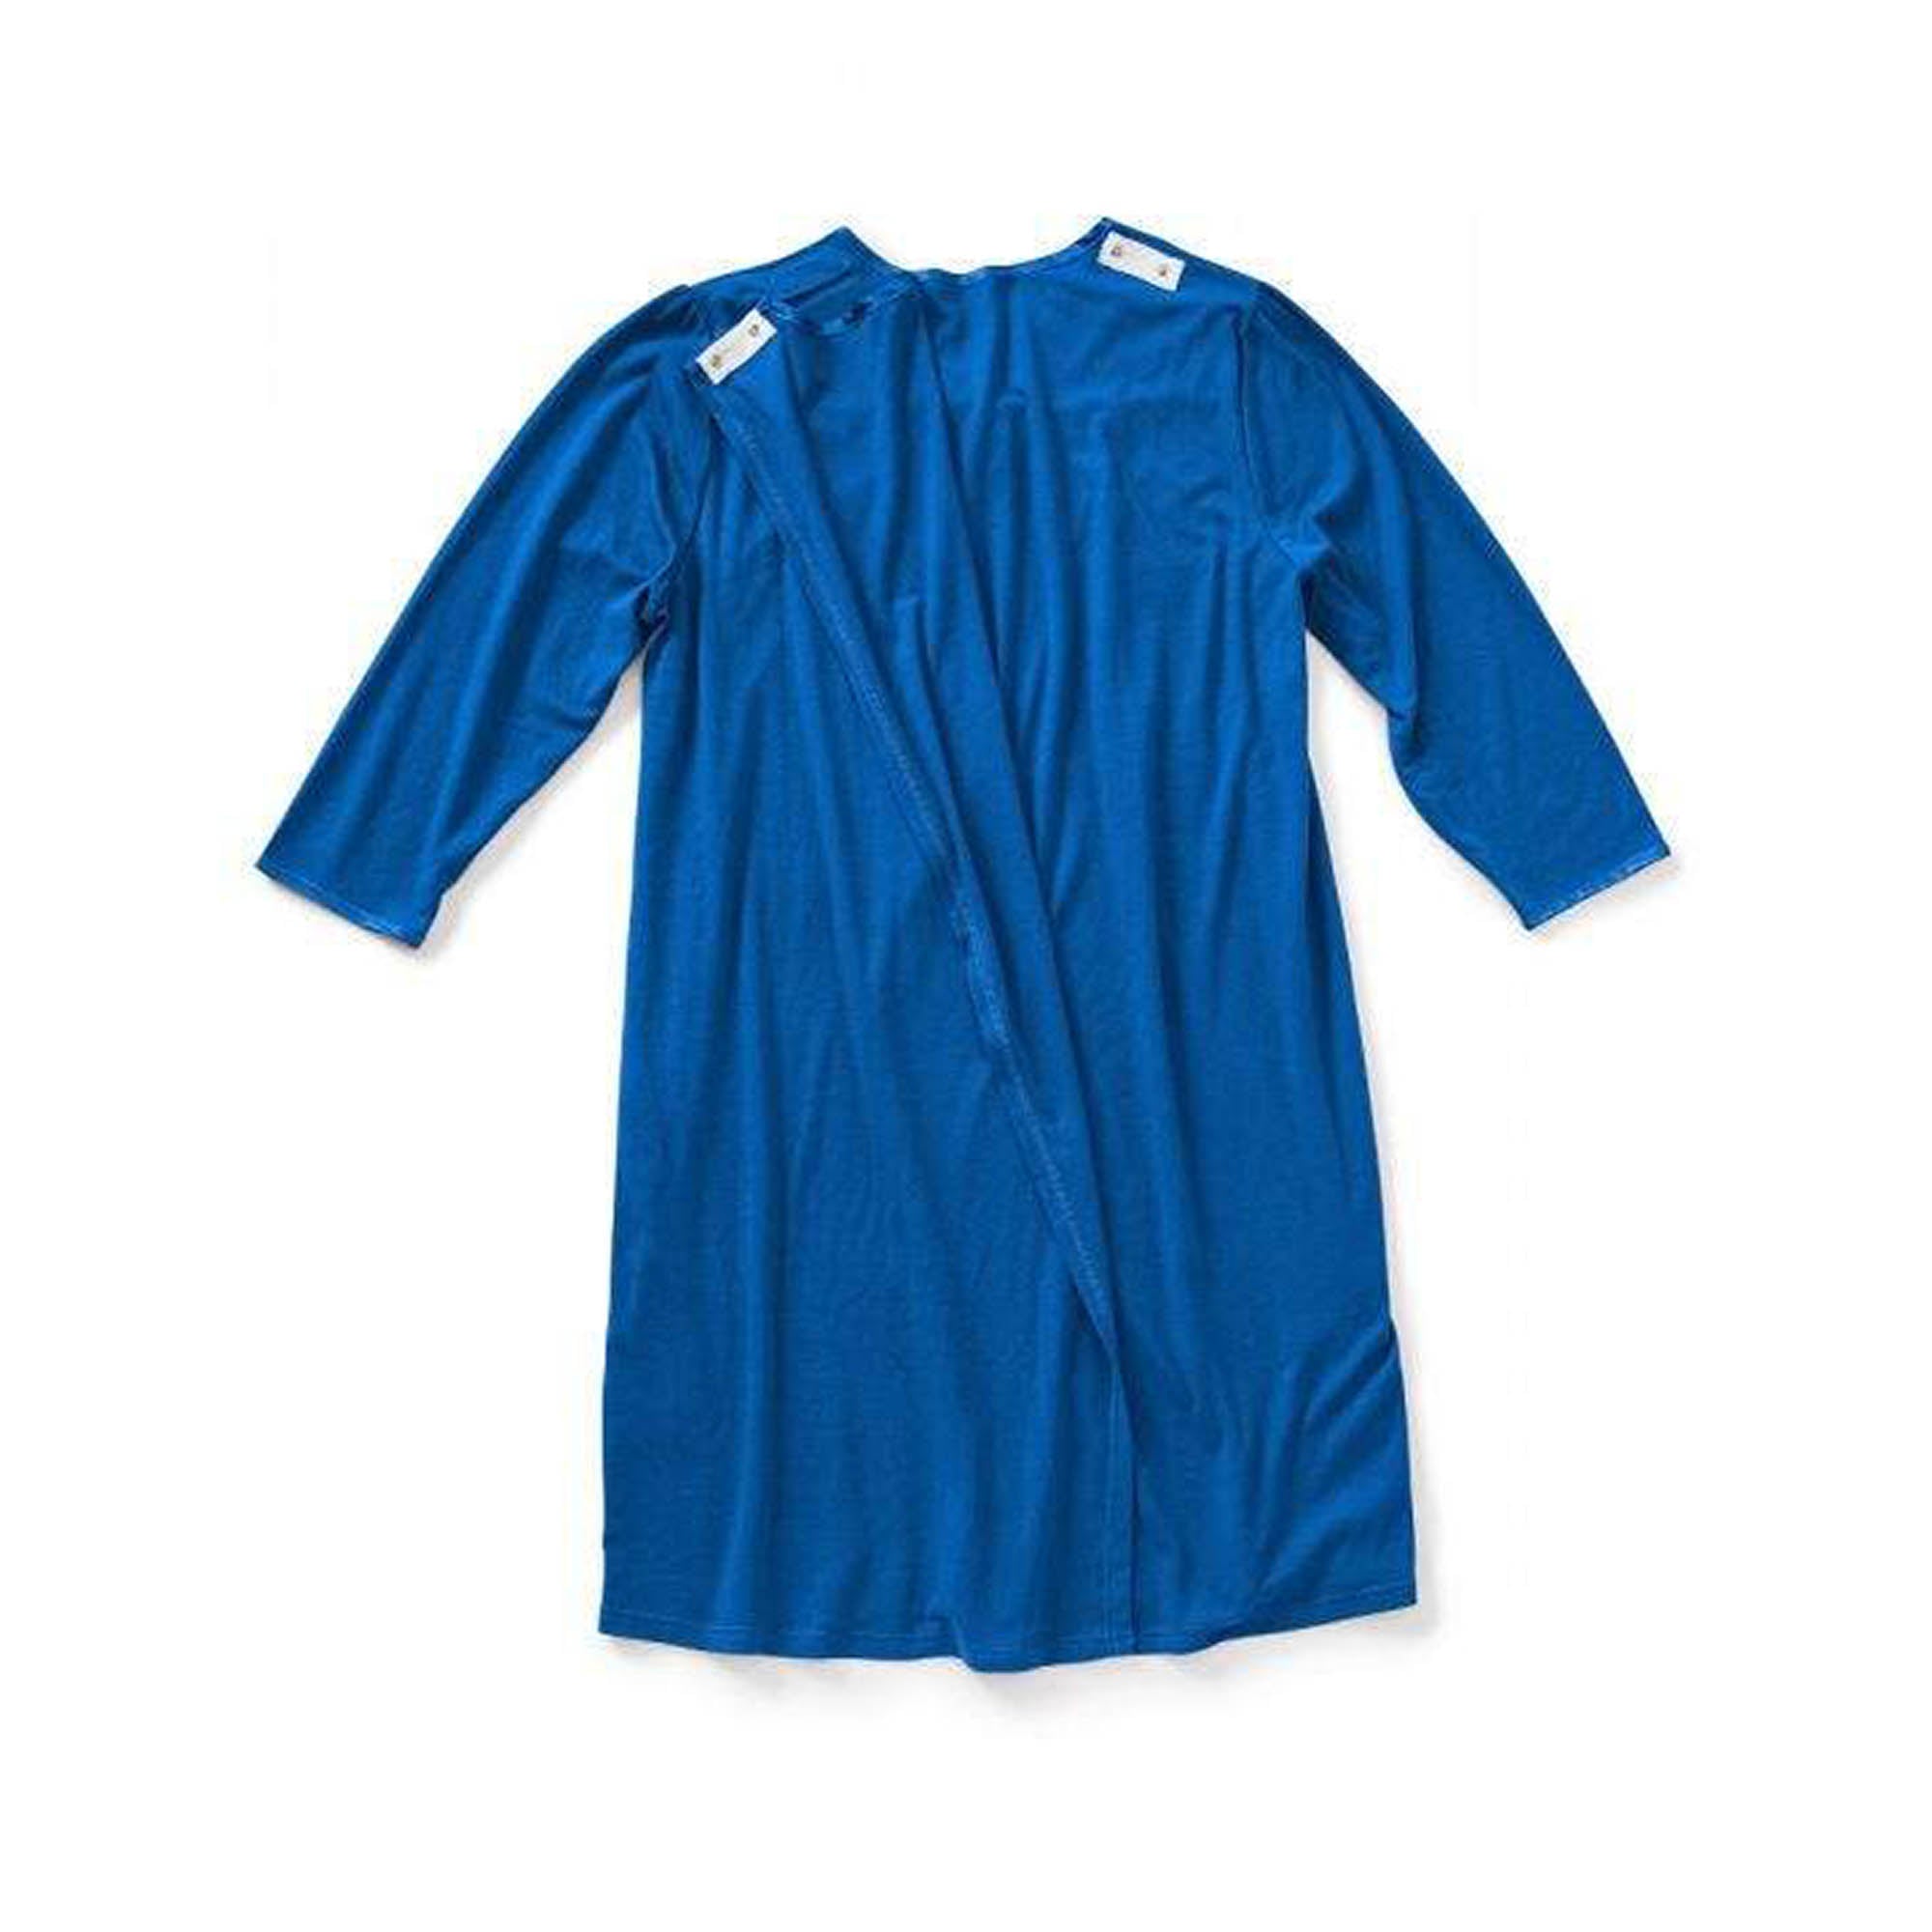 Silverts Women's Open Back Antimicrobial Long-sleeve Nightgown - Adaptive Clothing - Blue - M